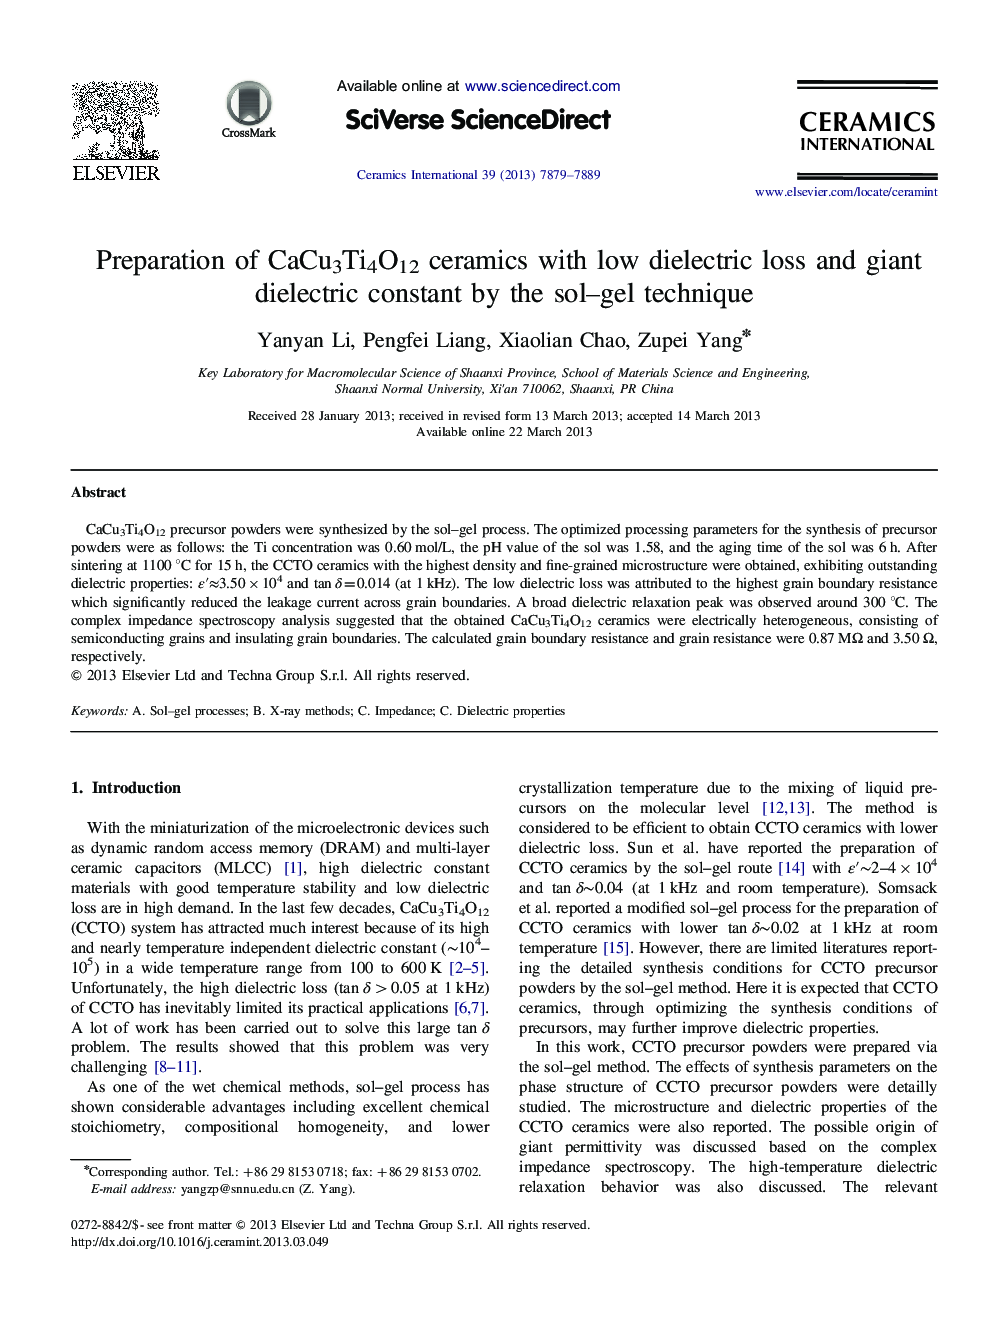 Preparation of CaCu3Ti4O12 ceramics with low dielectric loss and giant dielectric constant by the sol-gel technique